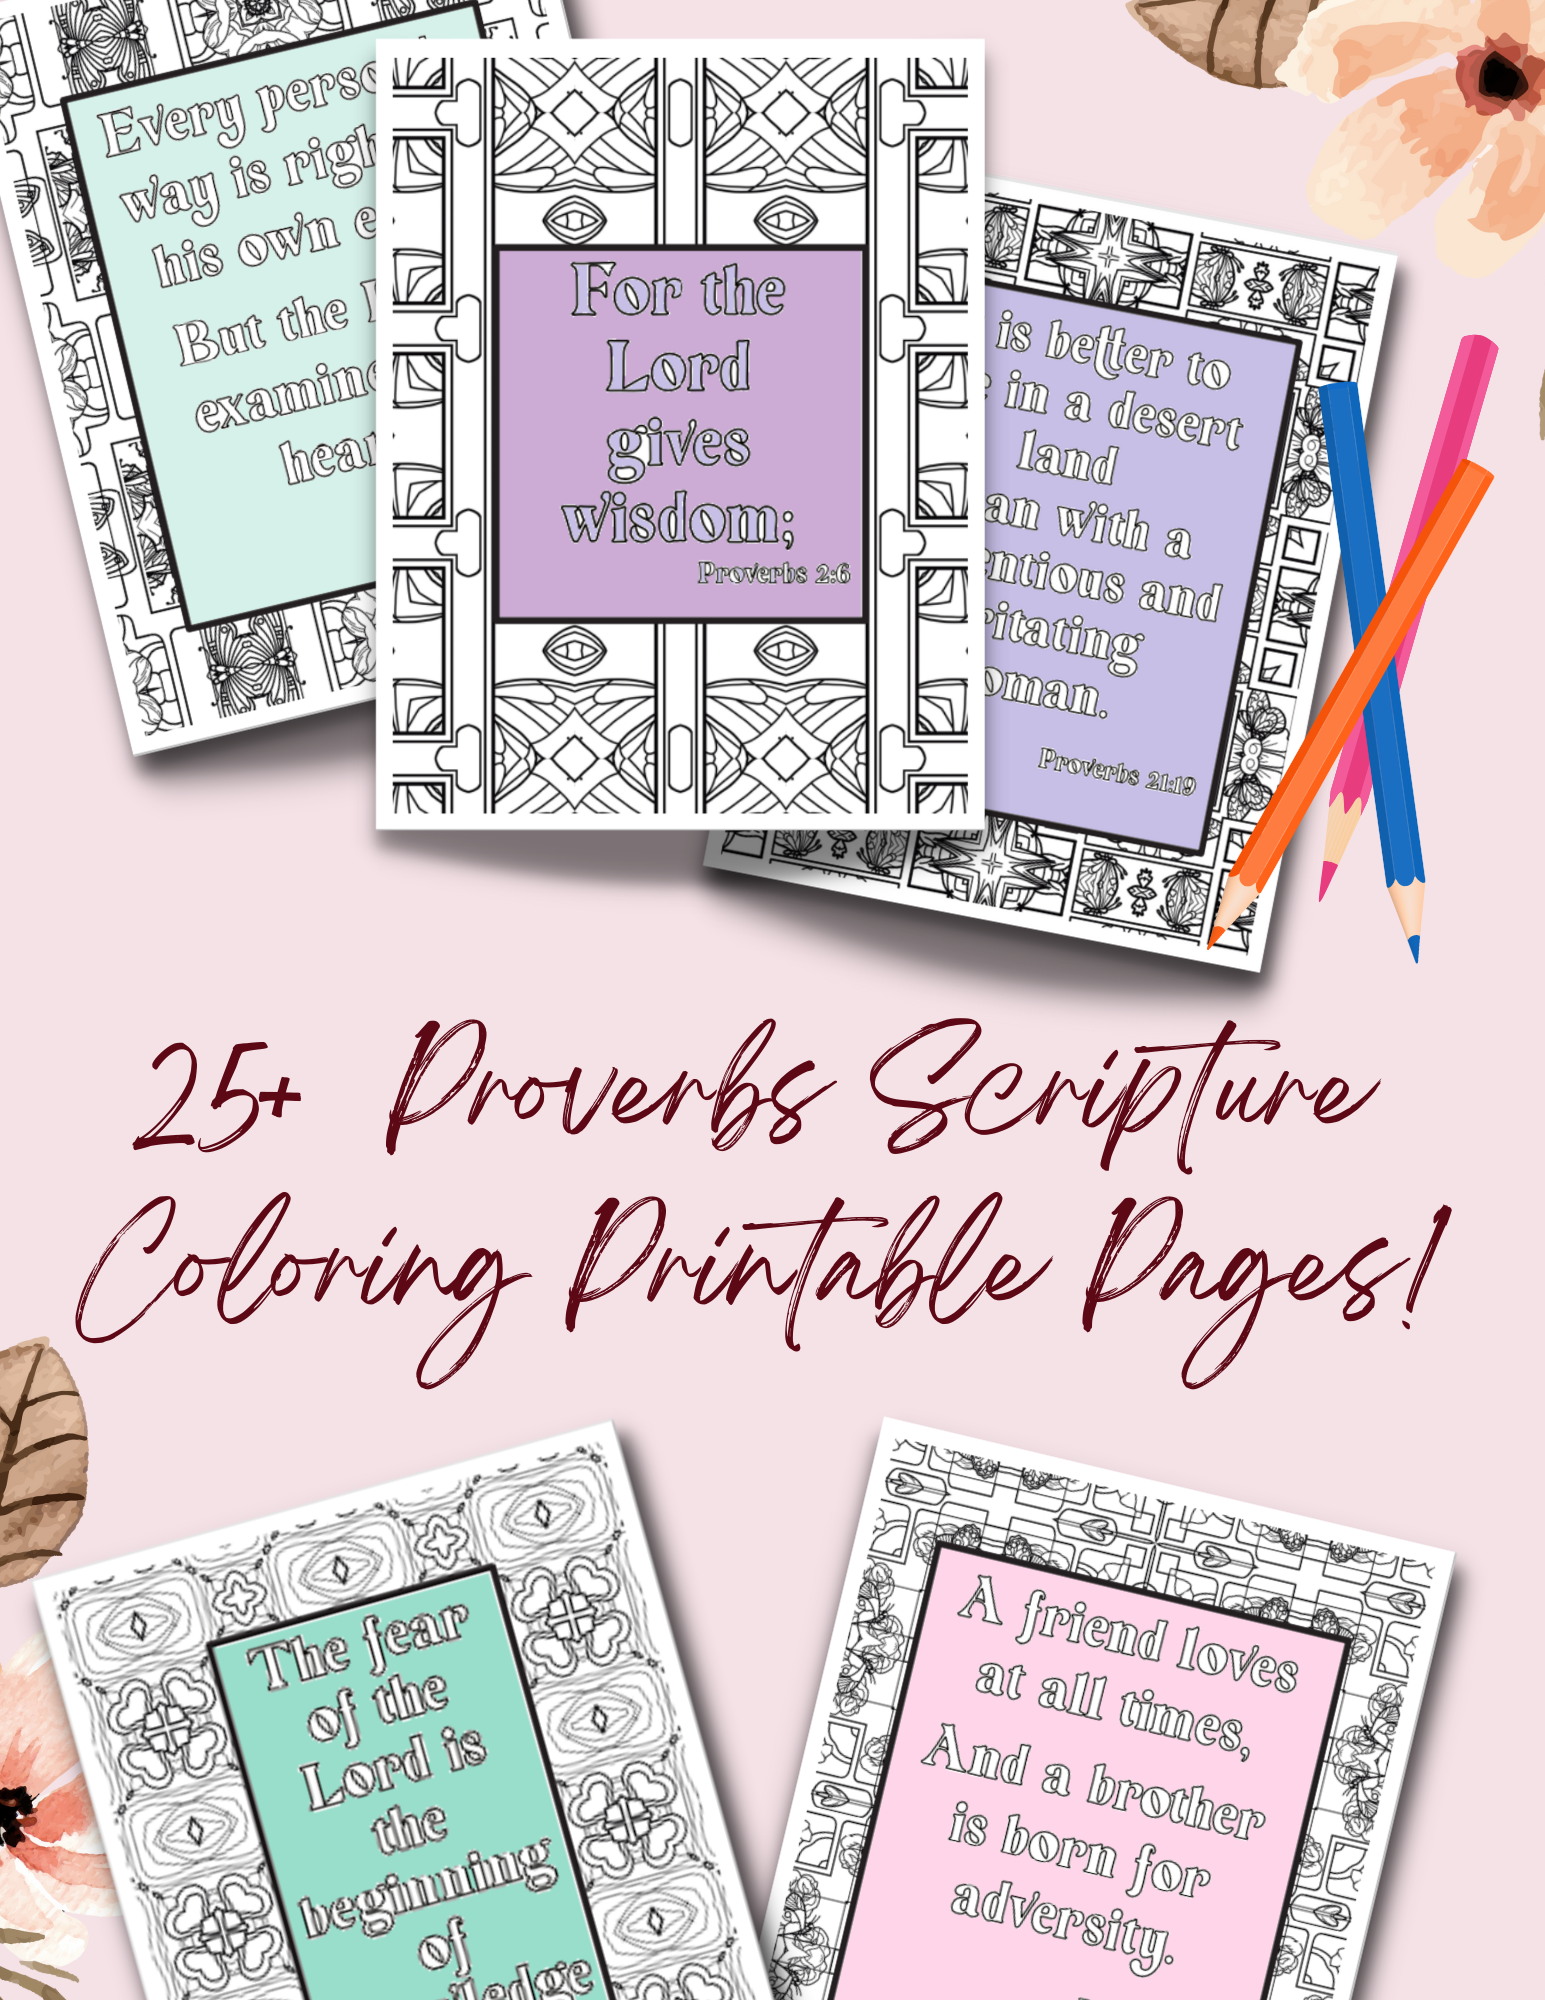 Lettering: 23 Proverbs scripture coloring pages in maroon color; coloring sheet graphics in purple, pink, and blue-green, colored pencil graphics, and pink flowers 